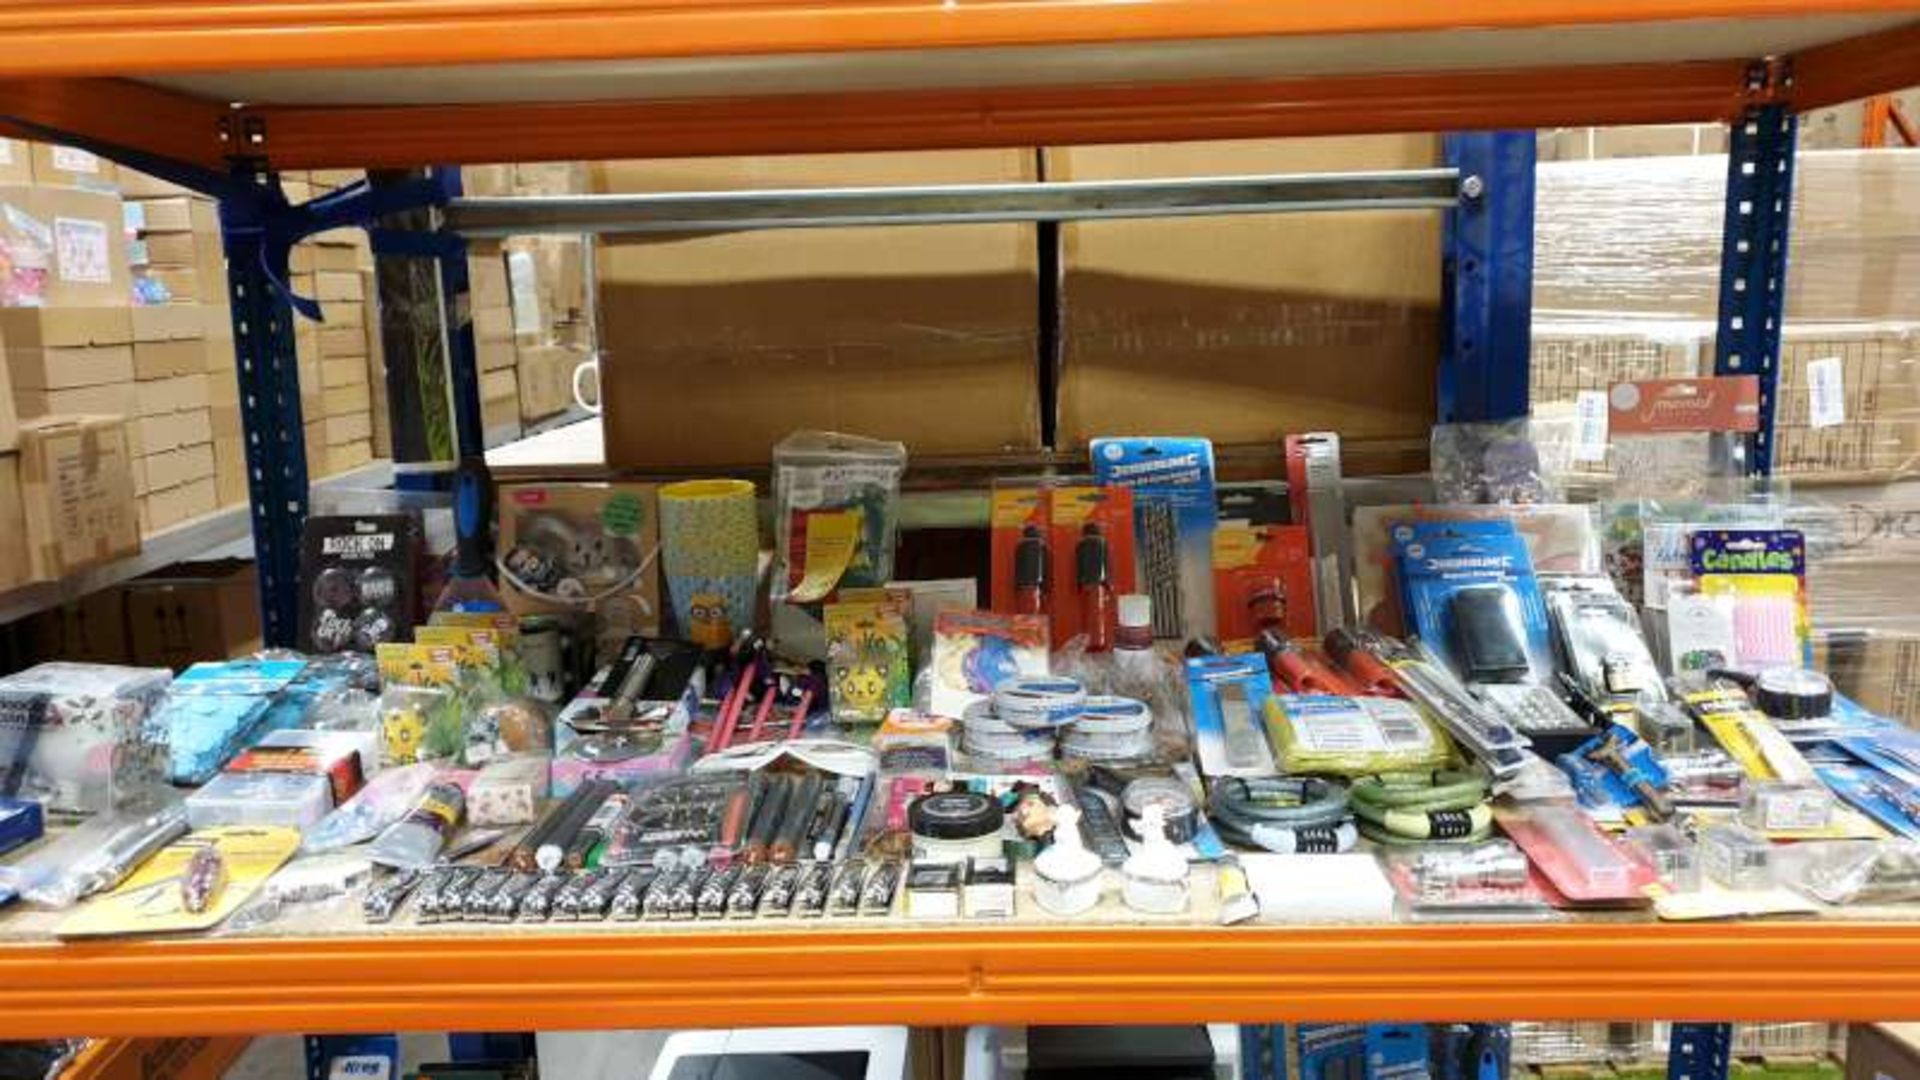 MIXED LOT CONTAINING FANCY DRESS, SILVERLINE TOOLS, ROLSON MULTI TOOLS, COIN BANKS, CANDLES,